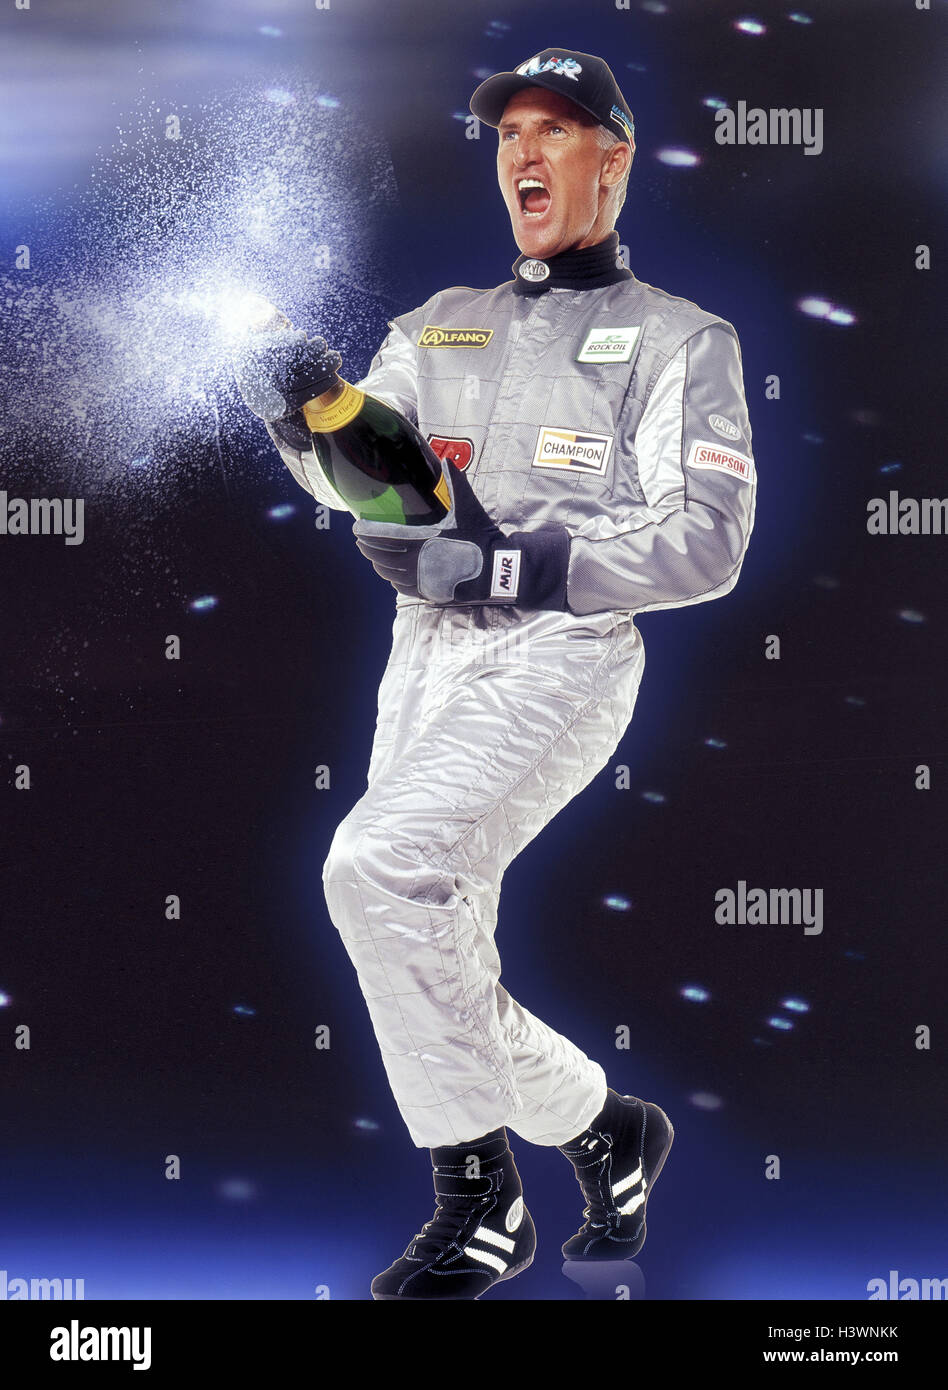 Motor sport, racing driver, overall, silver, champagne Bottle, cheering, victory, success sport, racing sport, man, racing suit, gloves, cap, winner, first, Sparkling Wine, joy, triumph, rejoice, please, triumph, celebrate, victory celebration, champagne douche, studio, Stock Photo